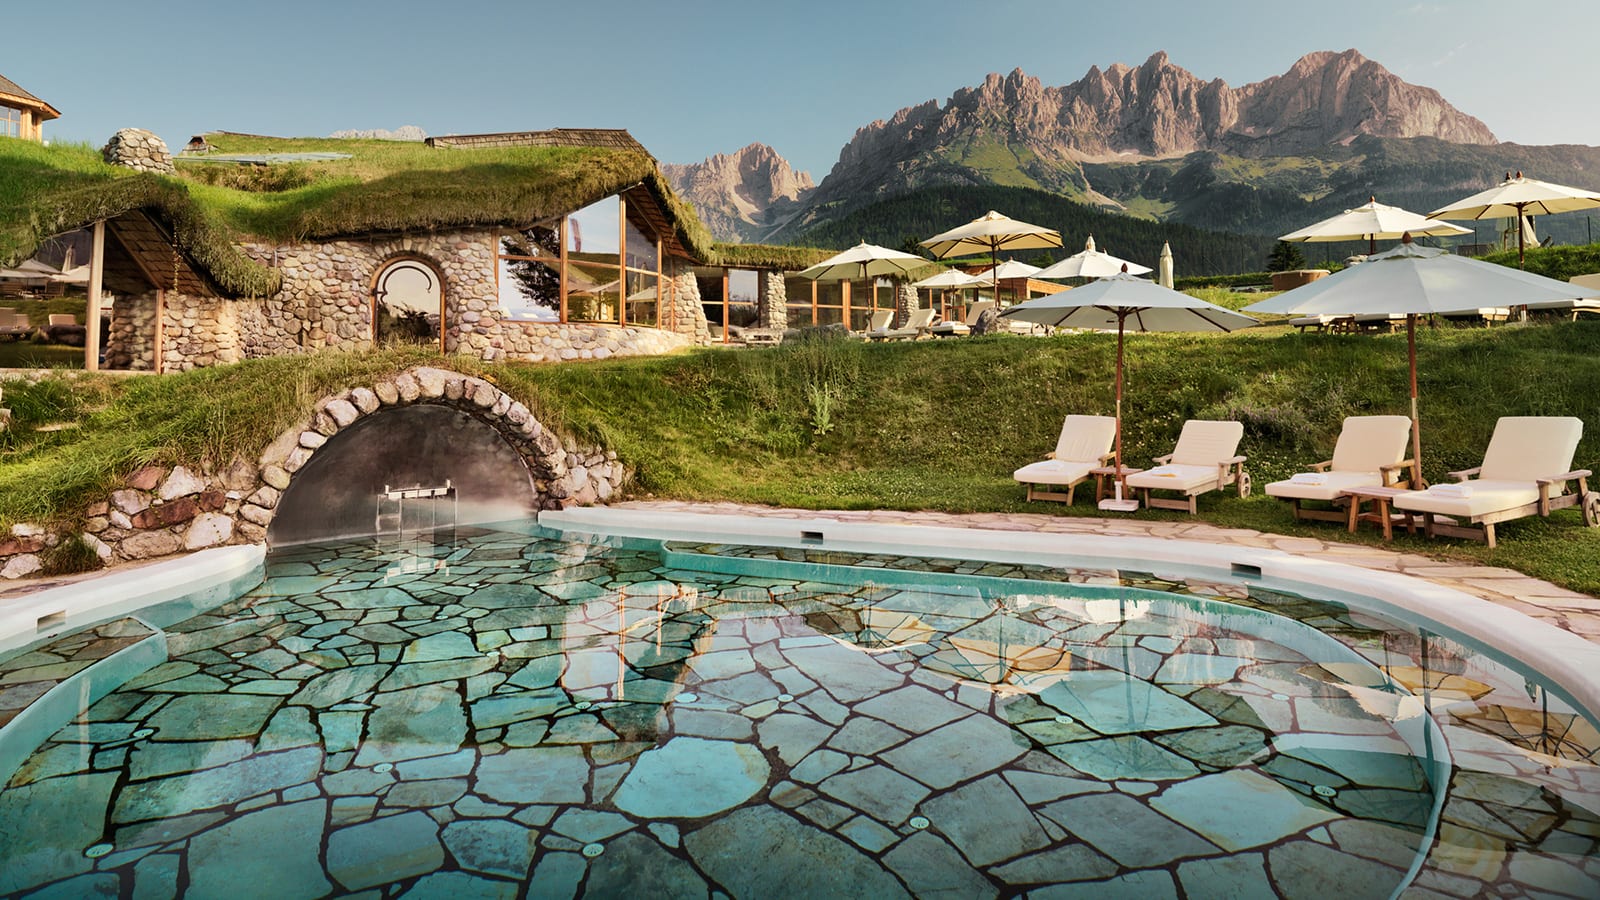 From New Zealand to Peru .. Here are 9 of the best spa resorts in the world